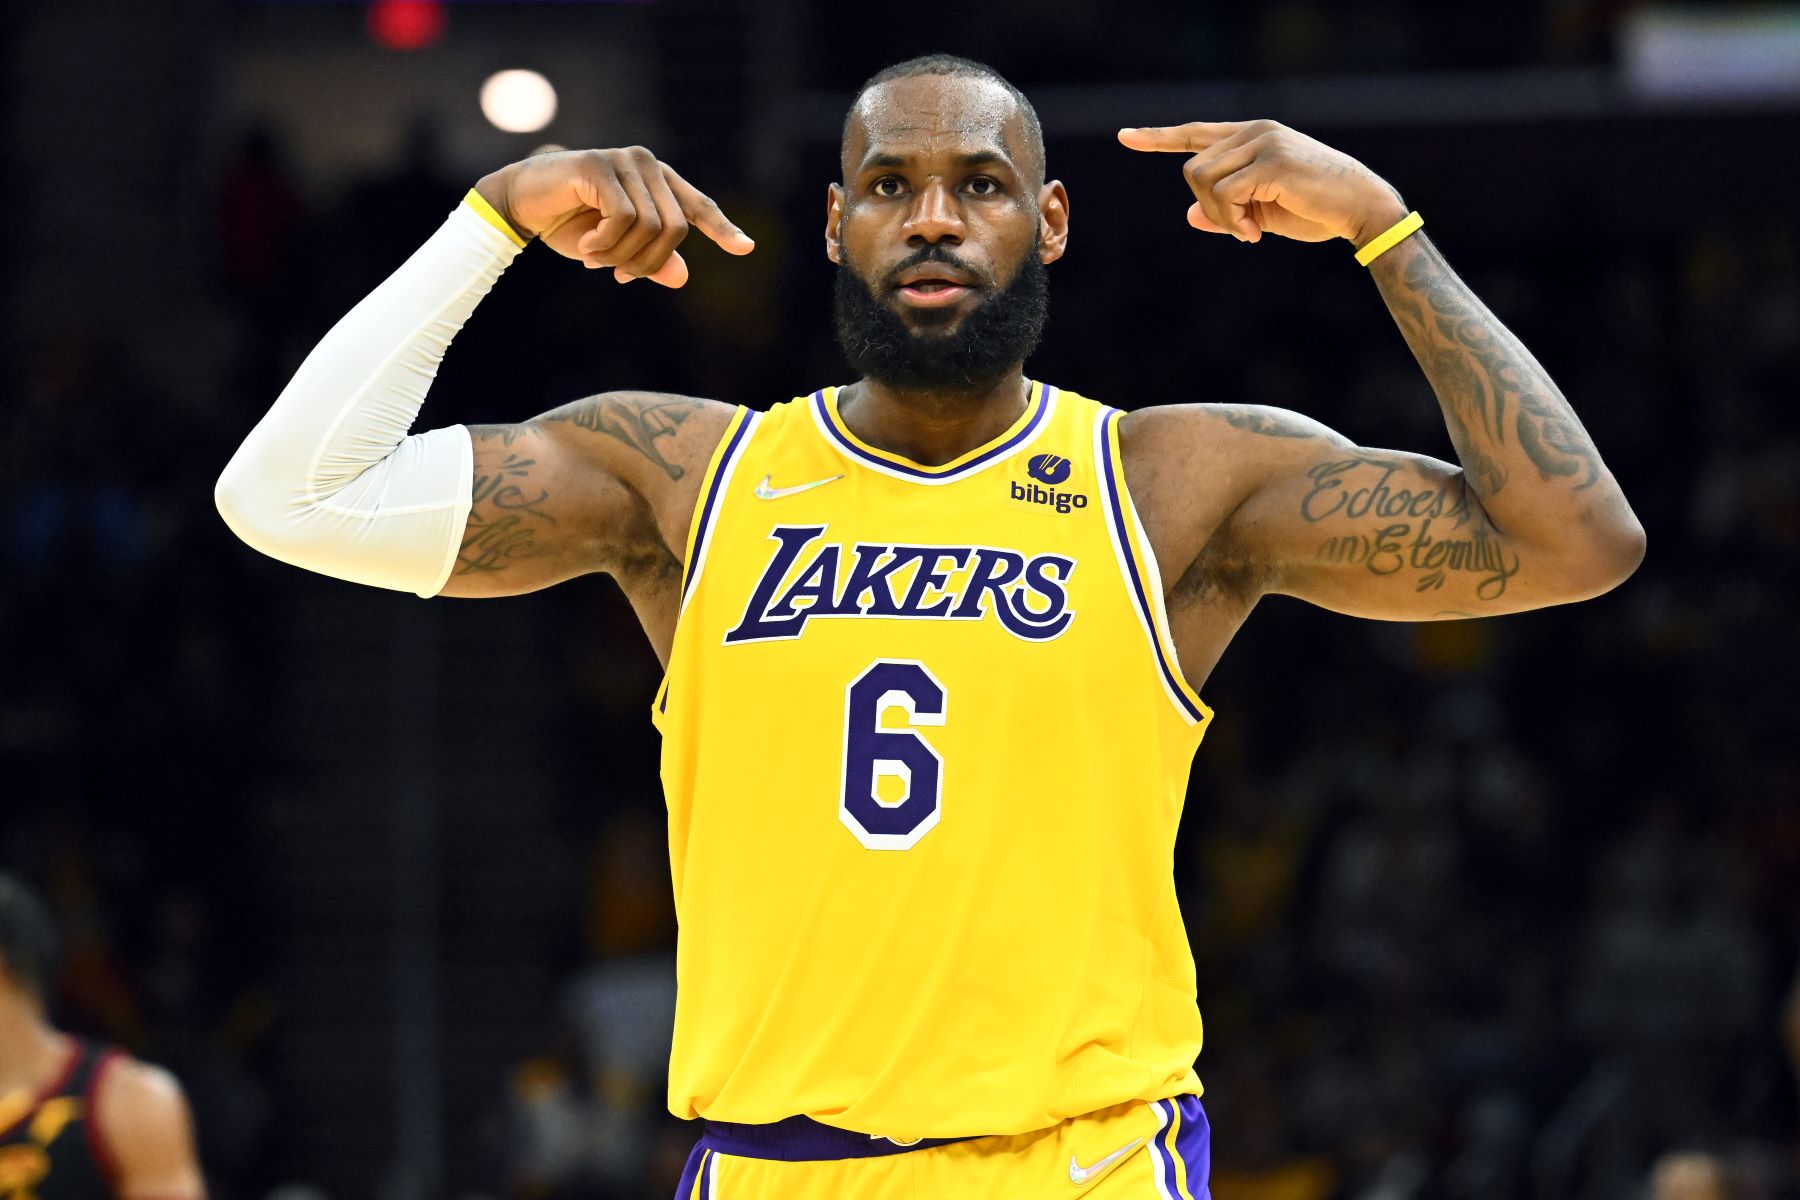 LeBron James #6 of the Los Angeles Lakers NBA team during a game against the Cleveland Cavaliers